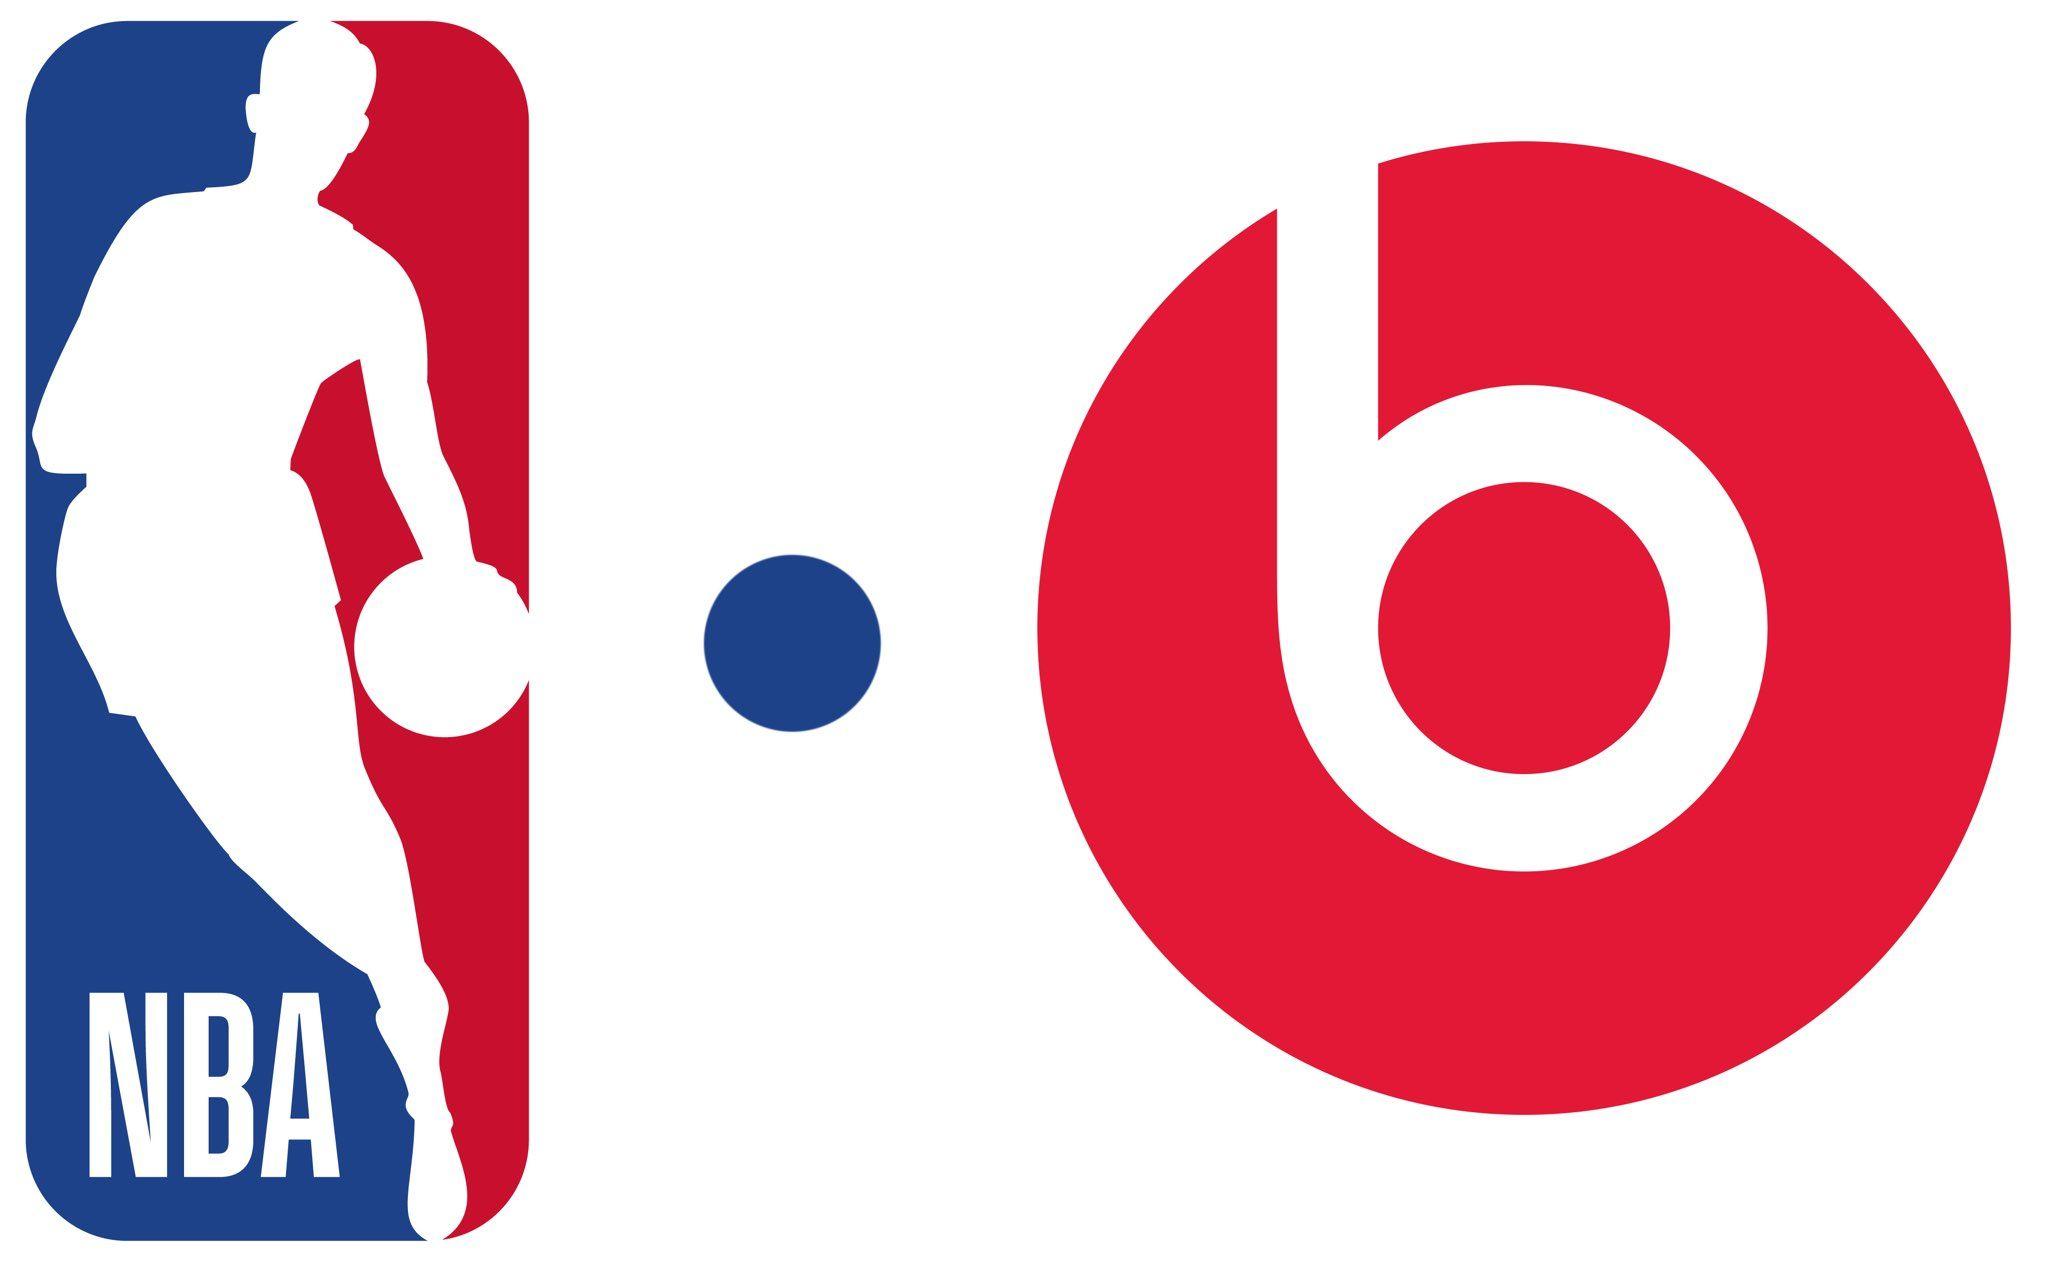 Dr. Dre Beats Logo - Beats by Dr. Dre and NBA unveil global marketing and merchandising